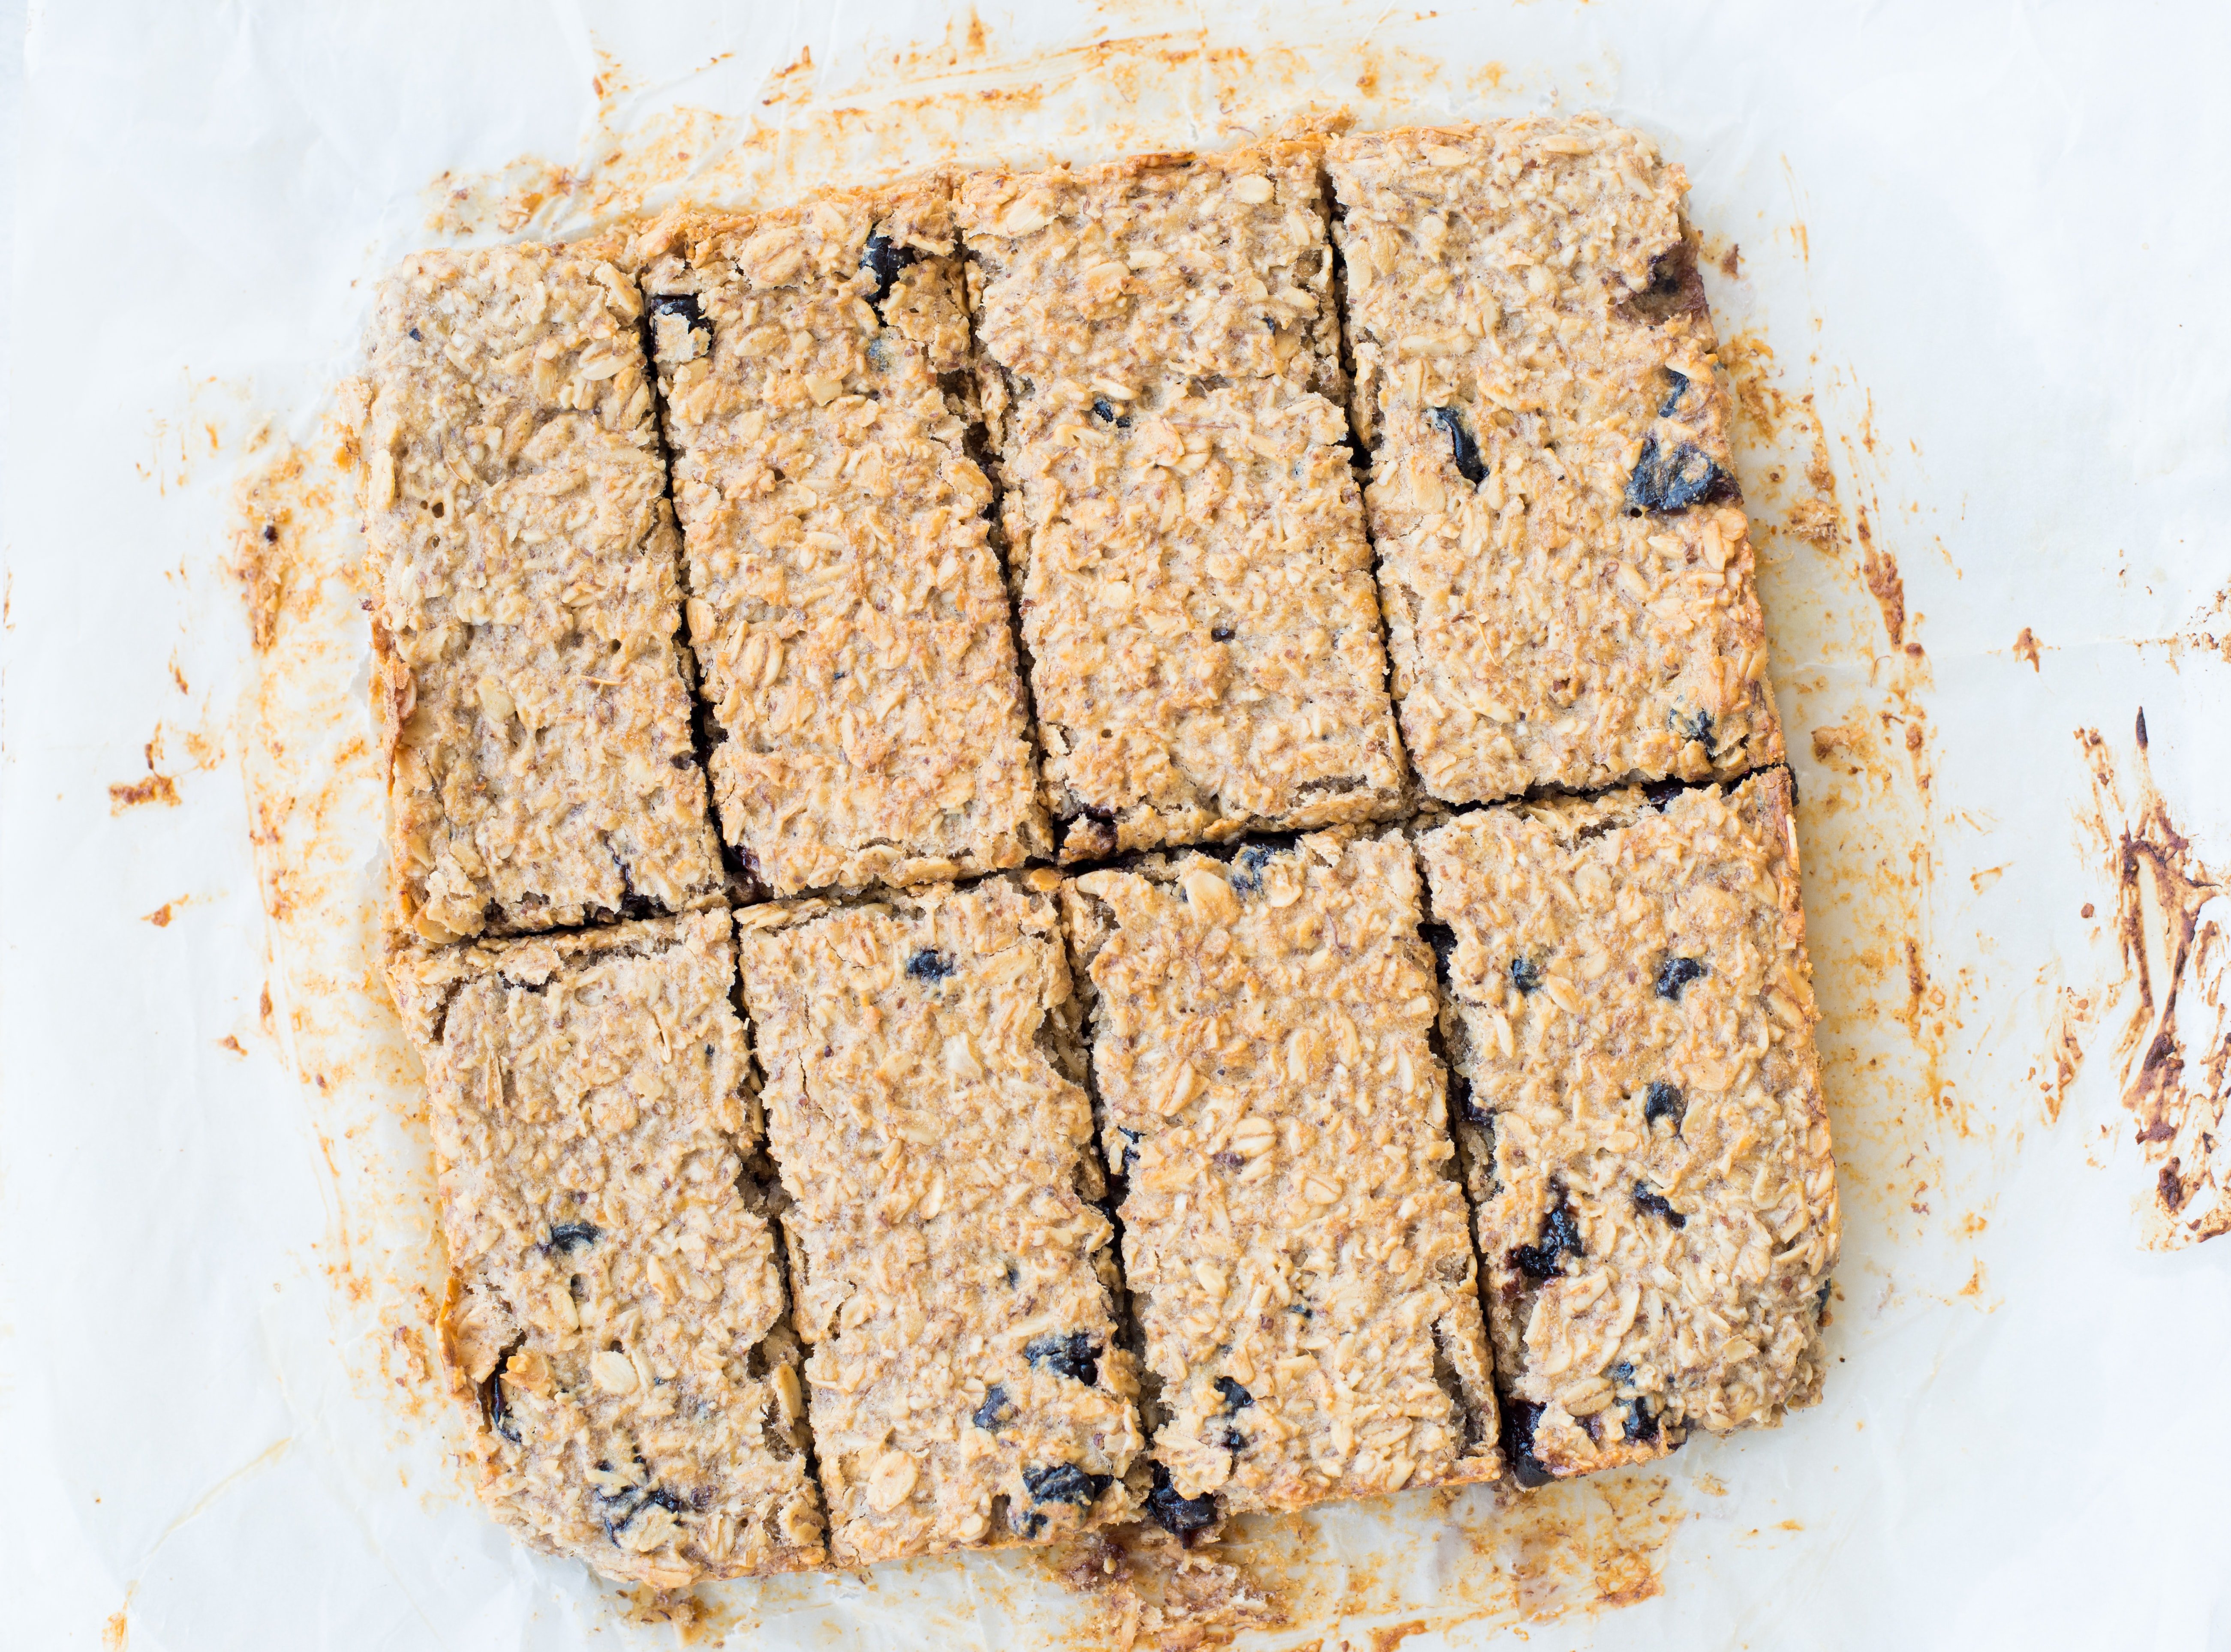 Healthy Blueberry Banana Granola bar is our new obsession at home. These soft and chewy homemade granola bars are gluten-free, vegan and refined sugar-free.